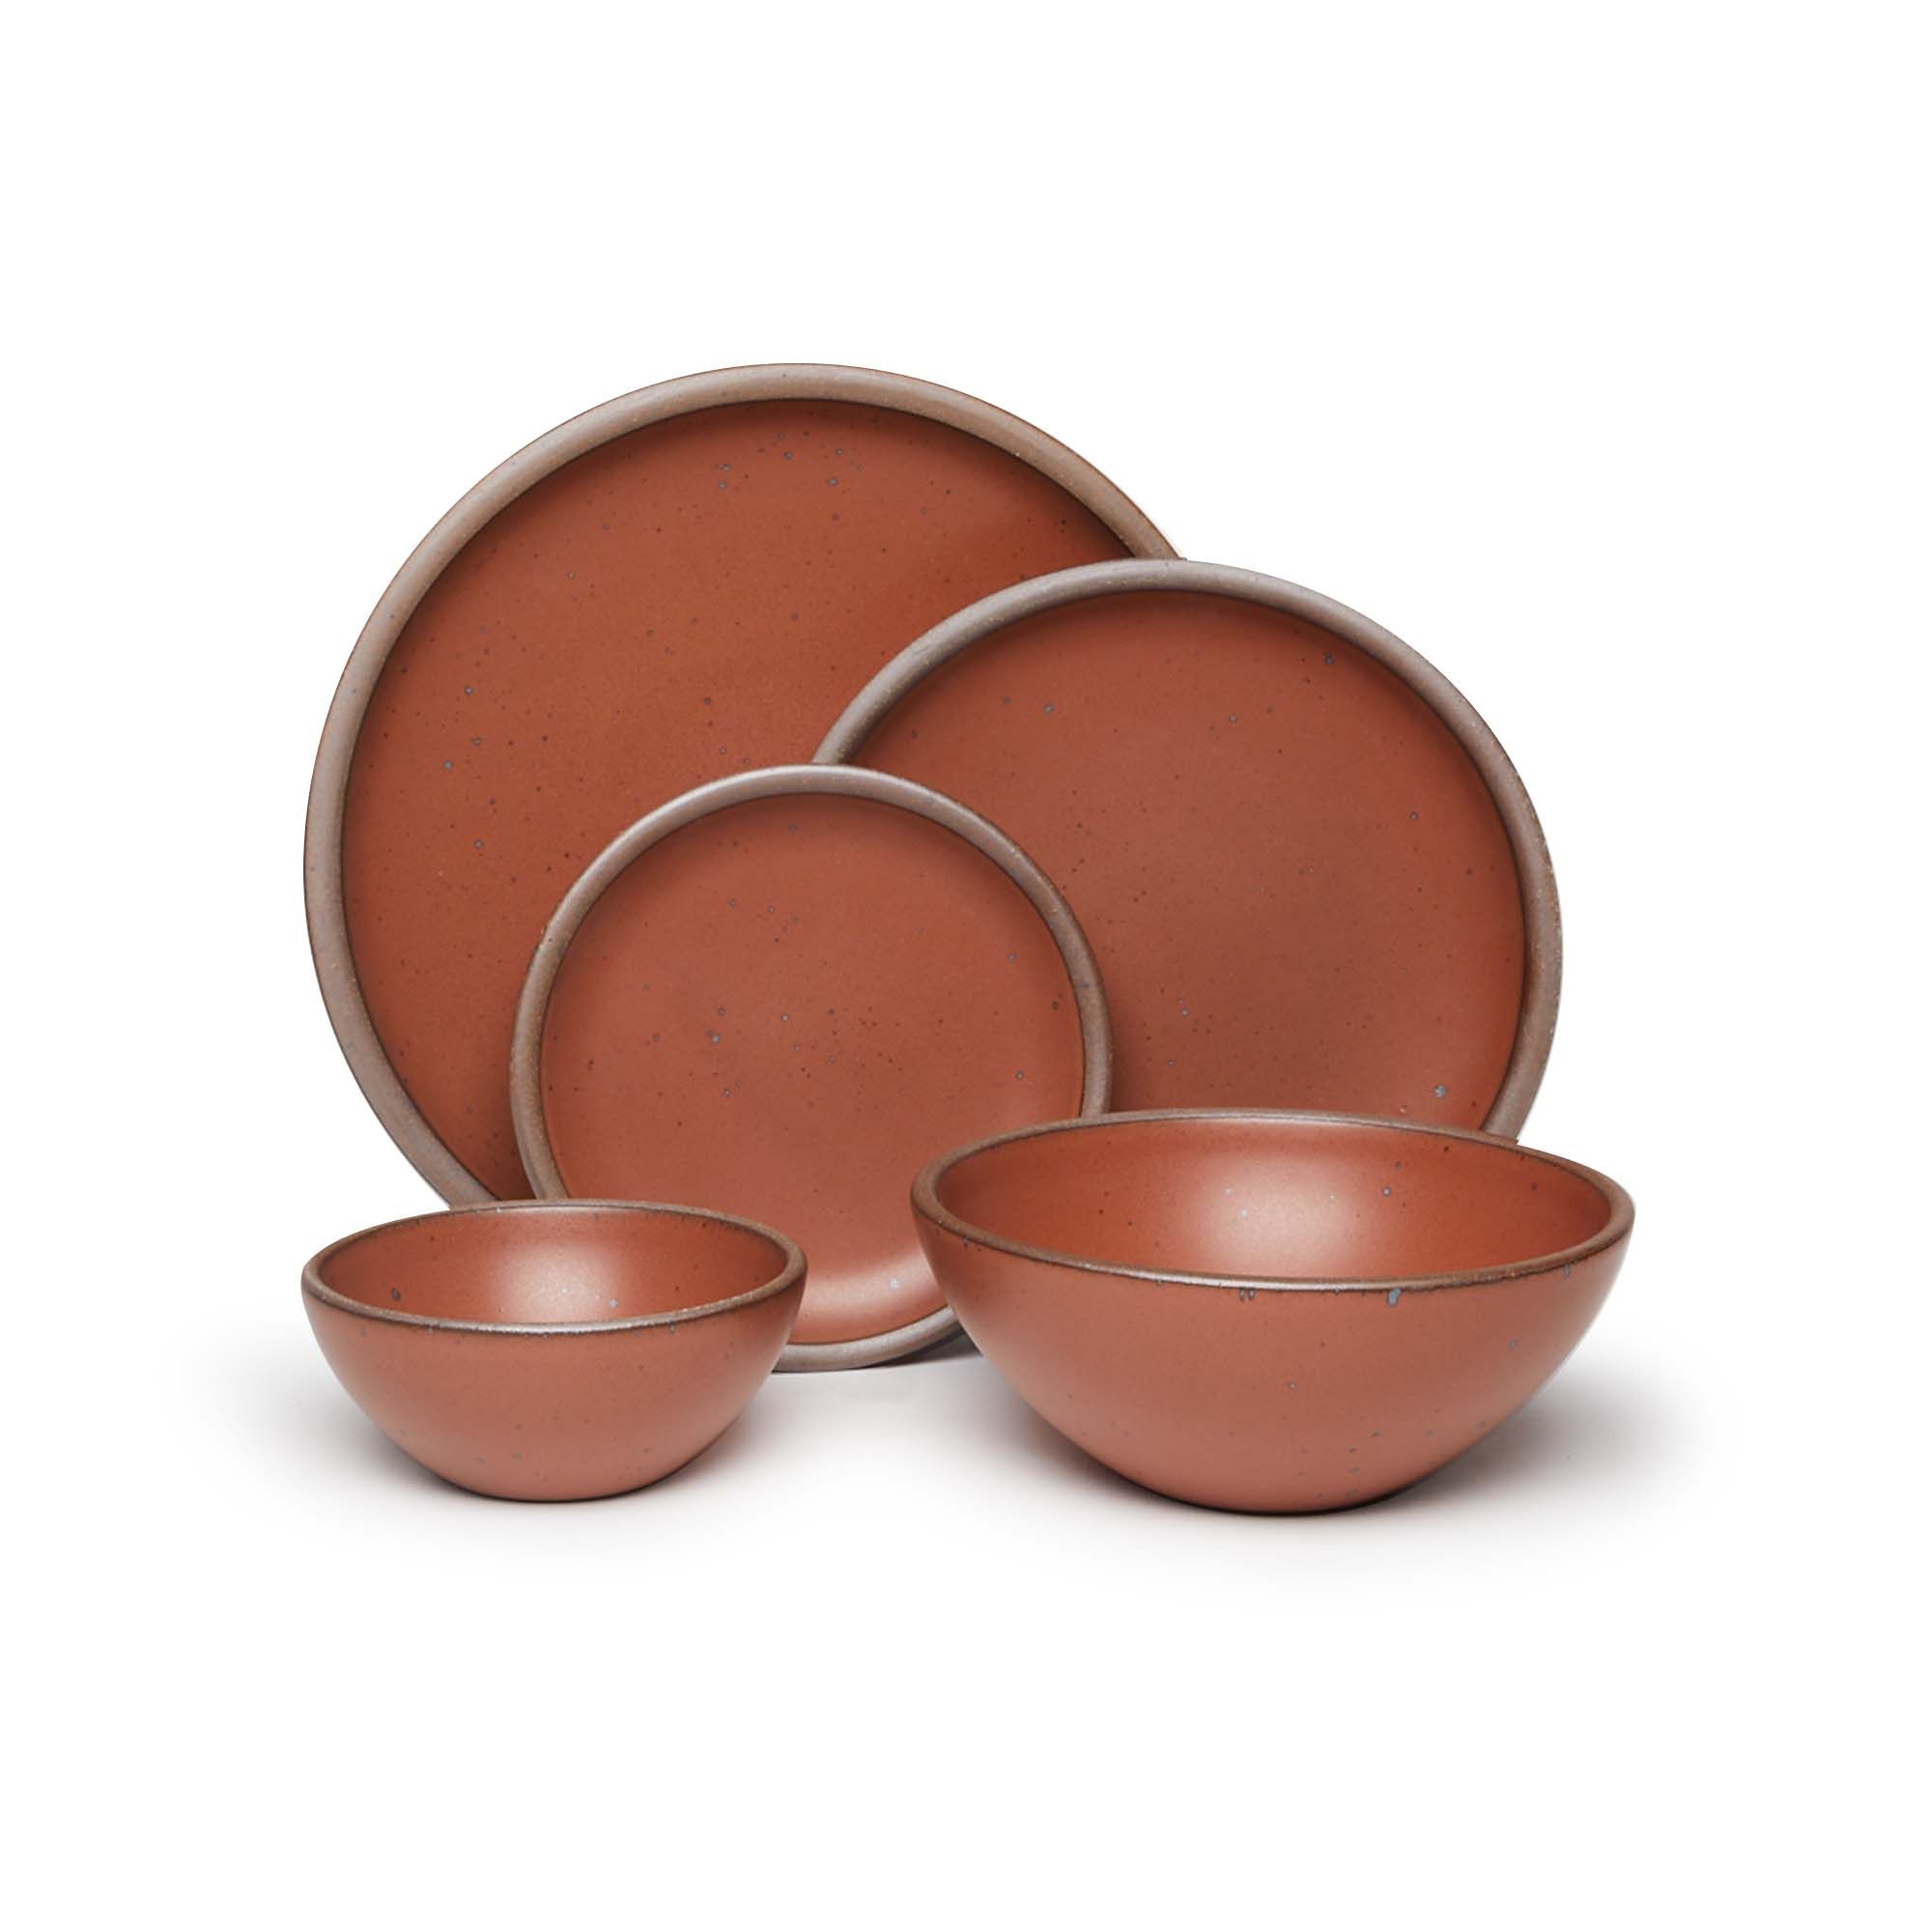 An ice cream bowl, soup bowl, cake plate, side plate and dinner plate paired together in a cool burnt terracotta featuring iron speckles